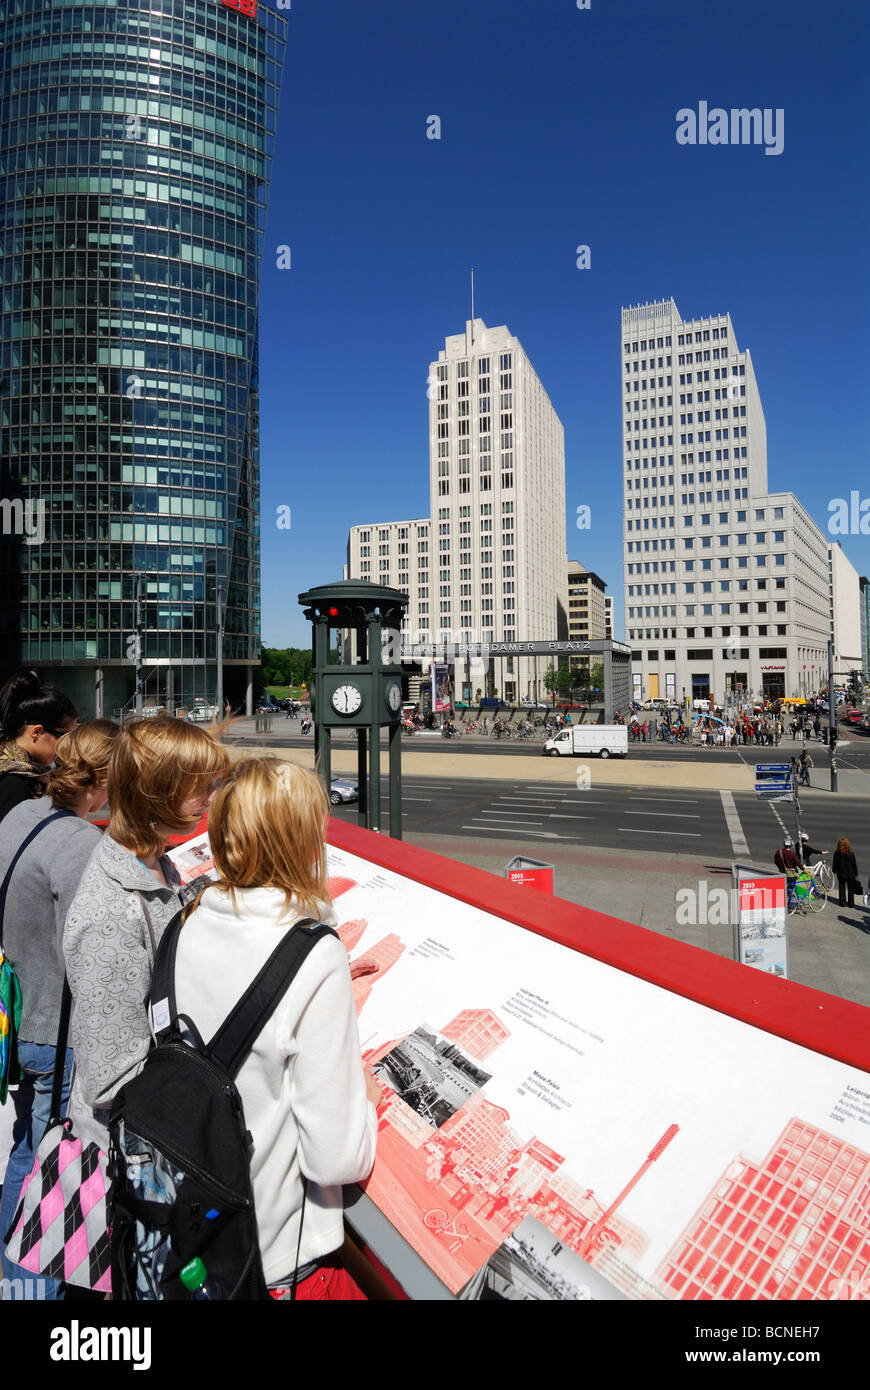 Berlin Germany Exhibition on Potsdamer Platz commemorating 20 years since the fall of the Berlin wall Stock Photo